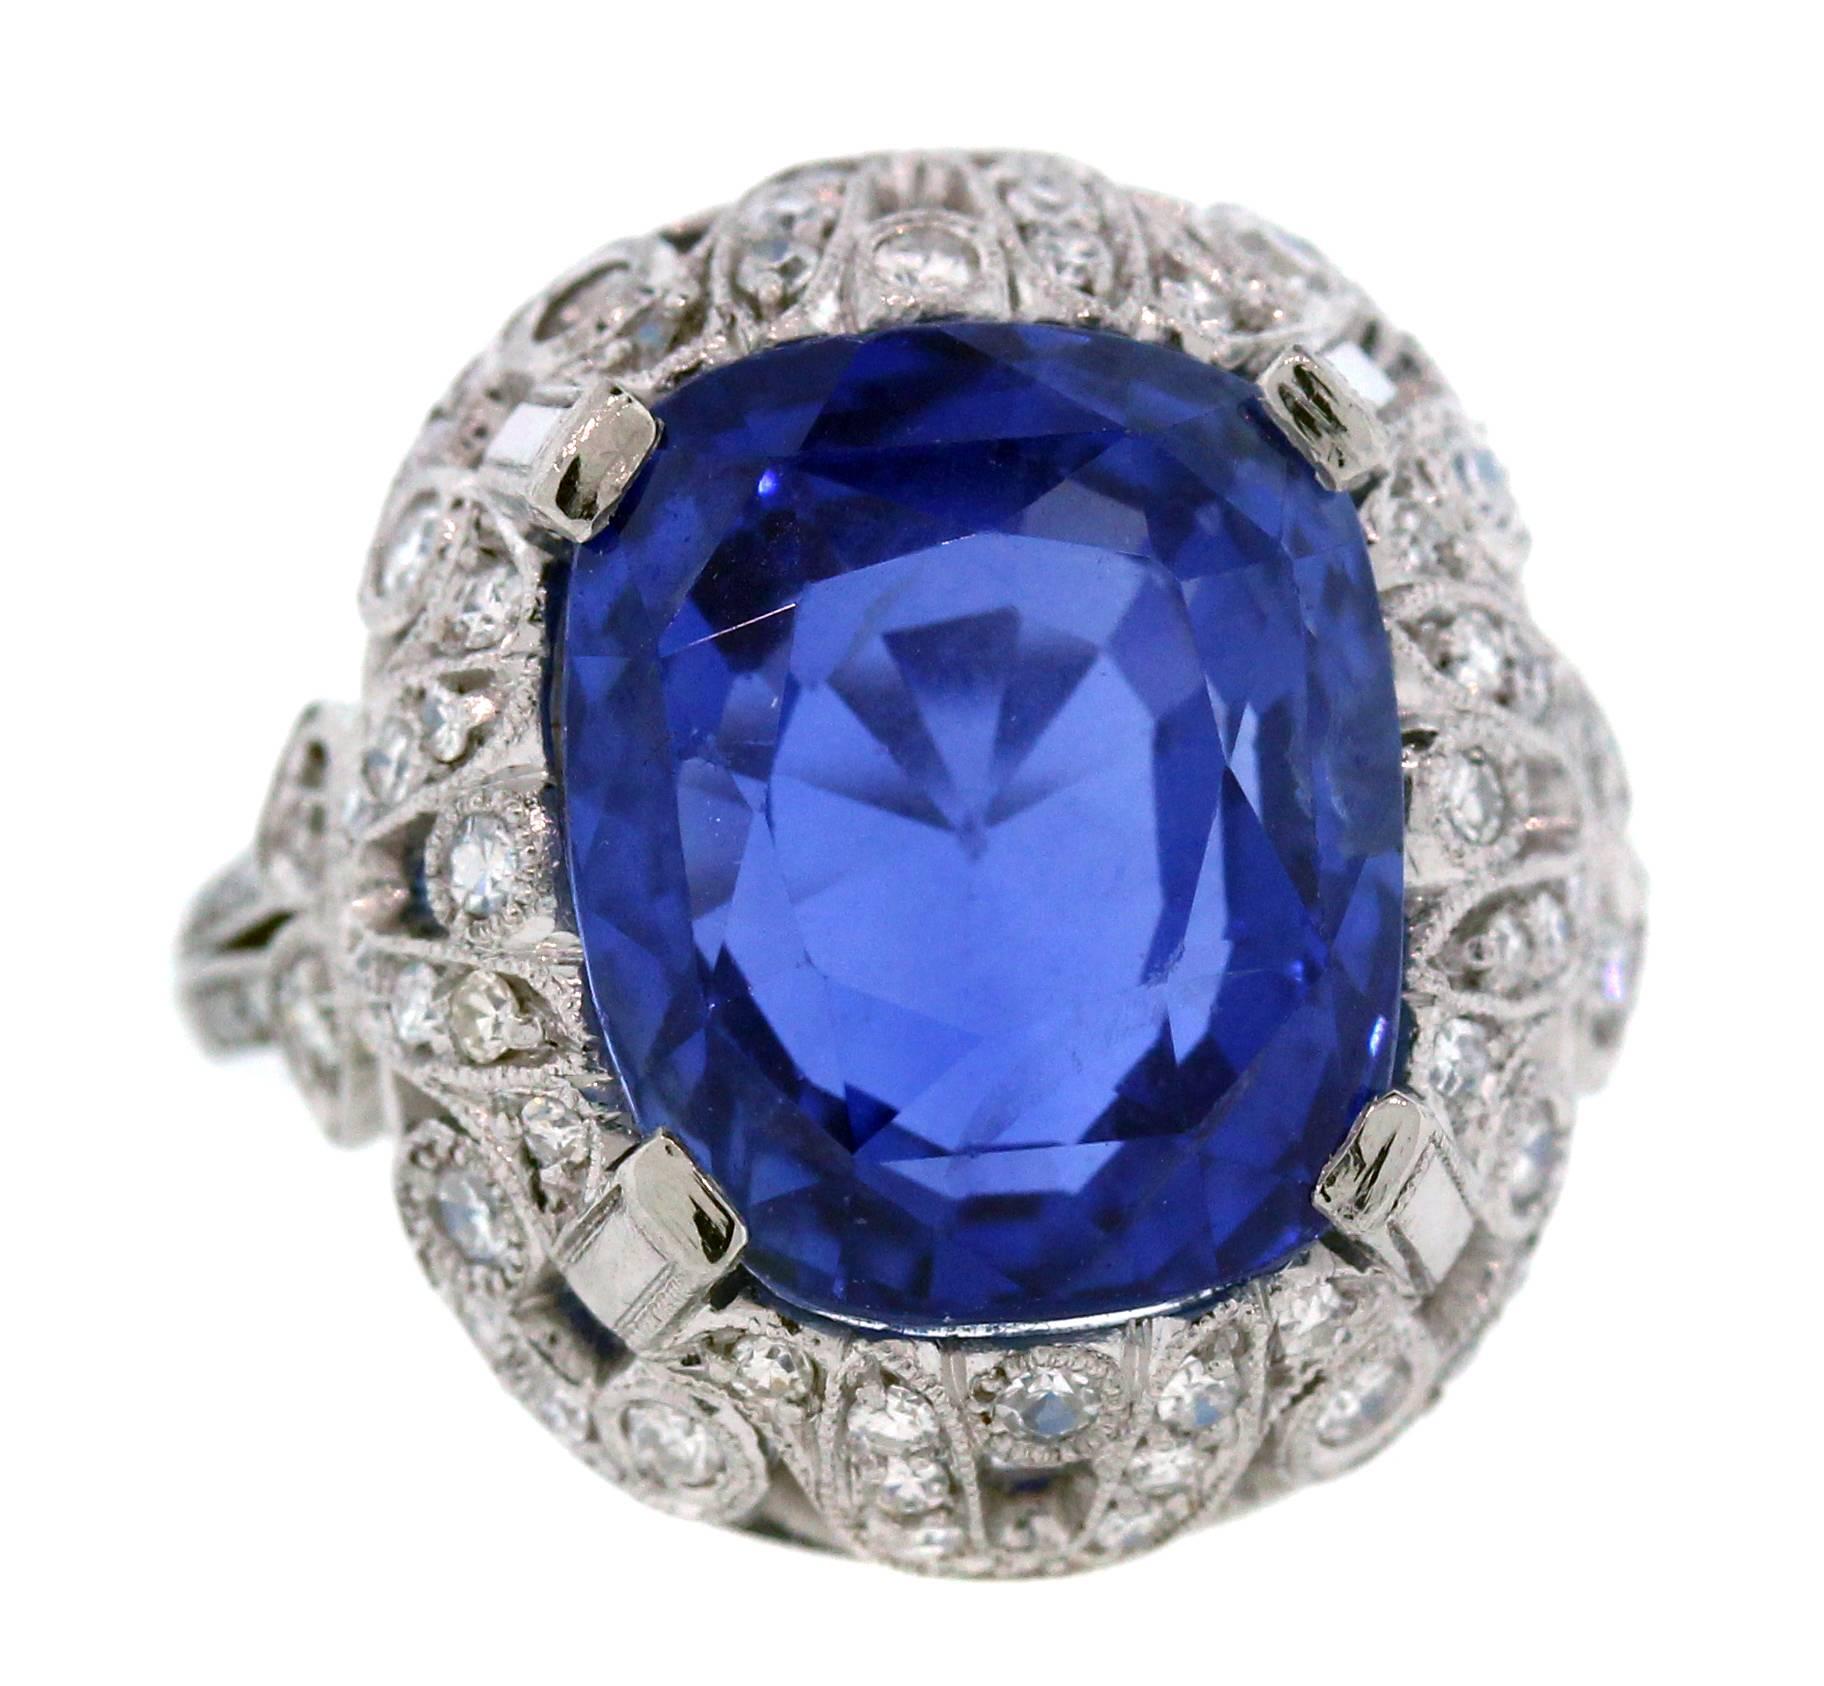 Platinum Ring with No Heat Burma Sapphire Center with Diamonds

11.78 carat Burma, No Heat, Natural Blue Sapphire. Cushion-cut. Truly remarkable in color. GIA #: 5121556958

Platinum ring has 0.65 carat diamonds set throughout.

Currently size 4.